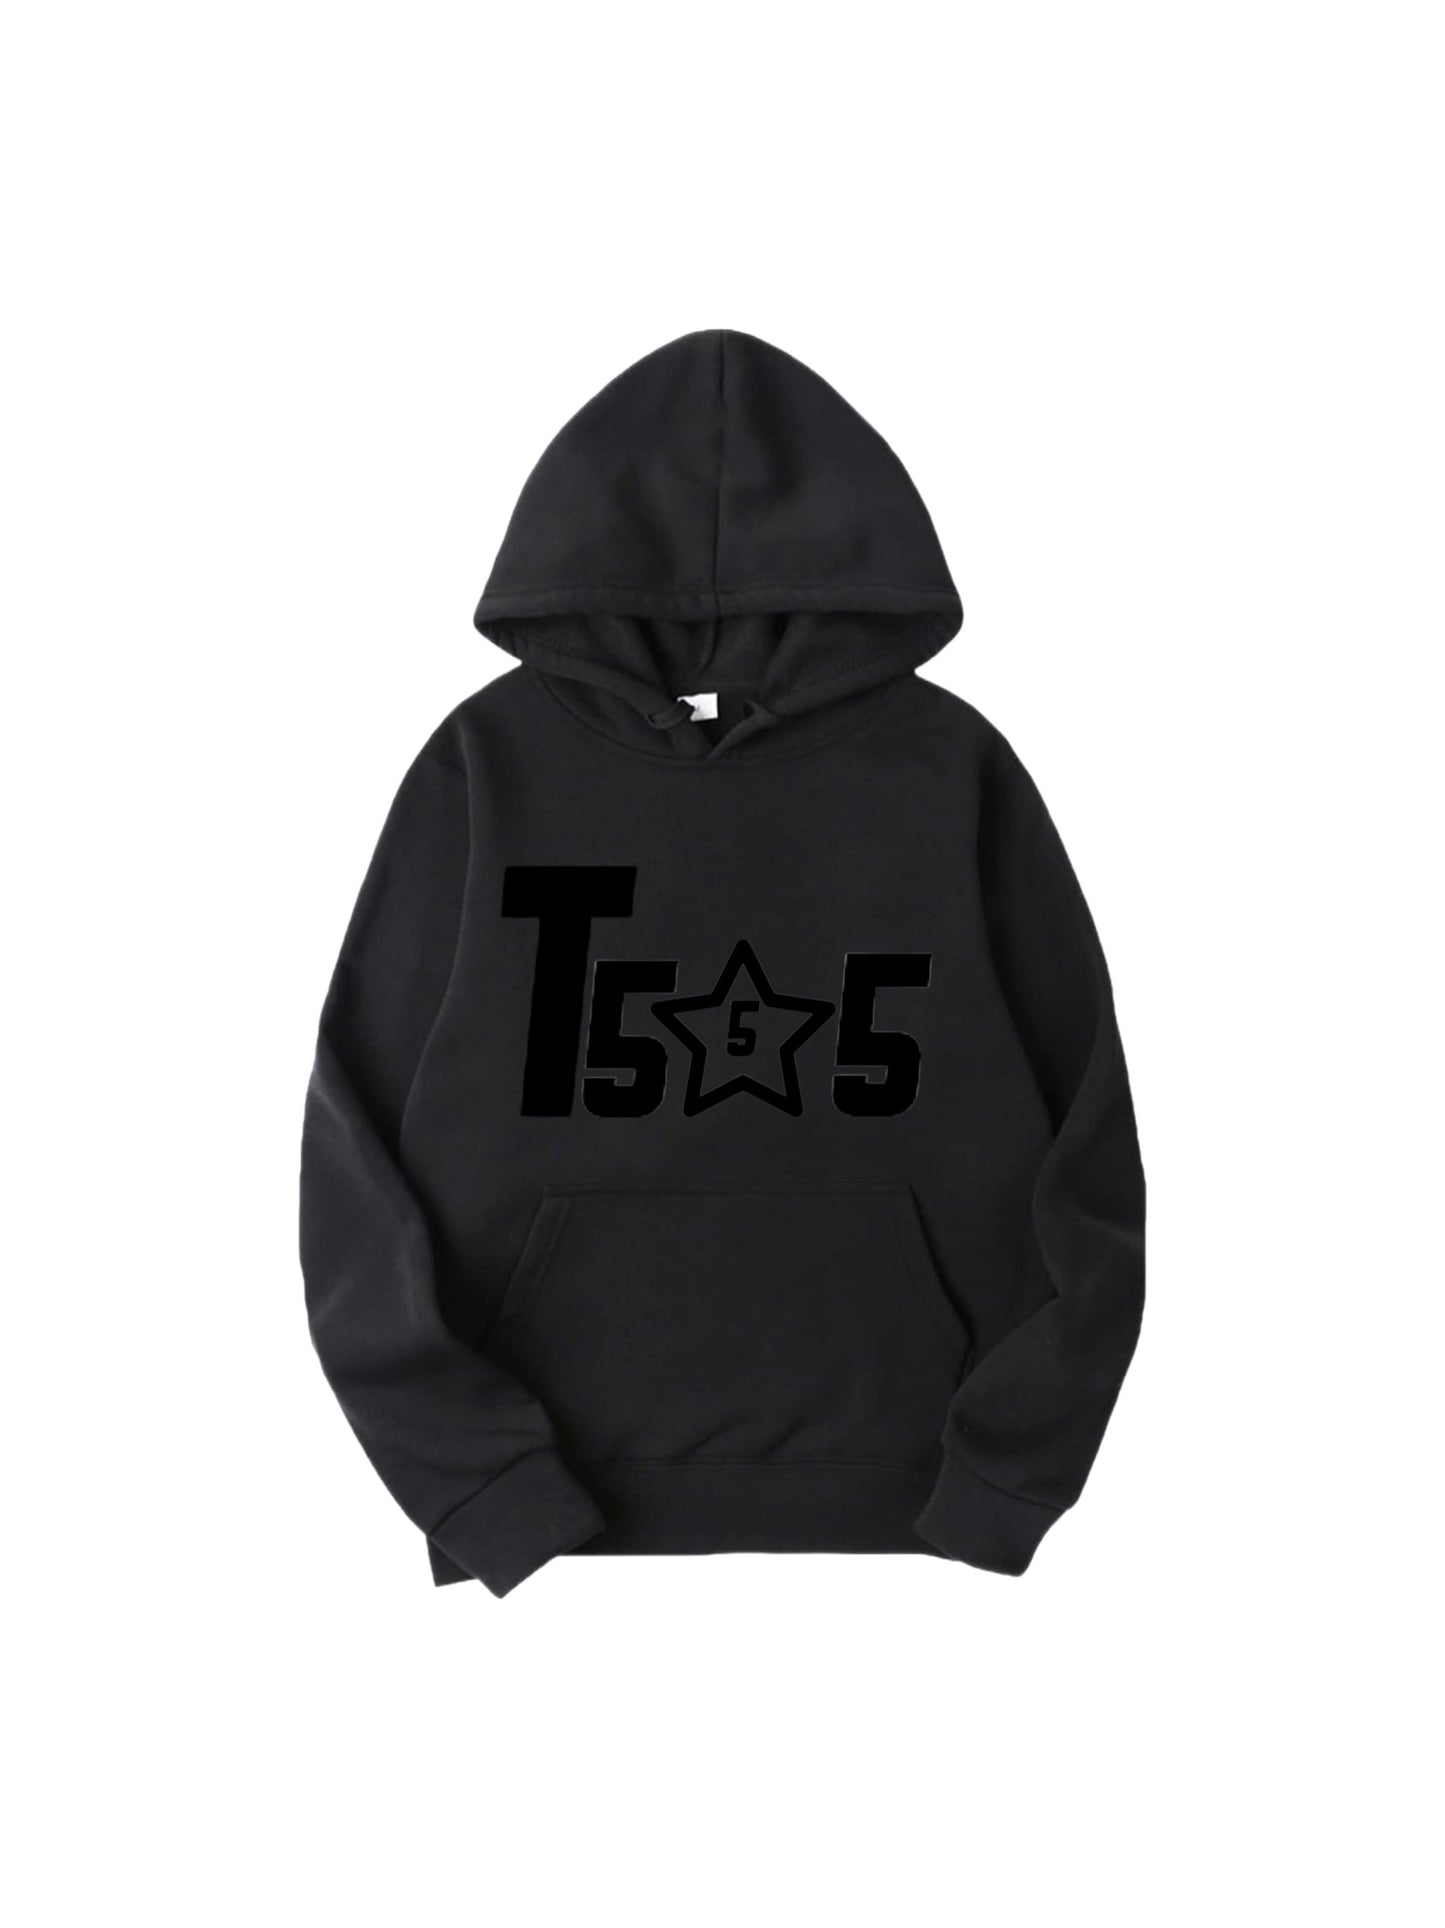 T555 Middle Star hoodies